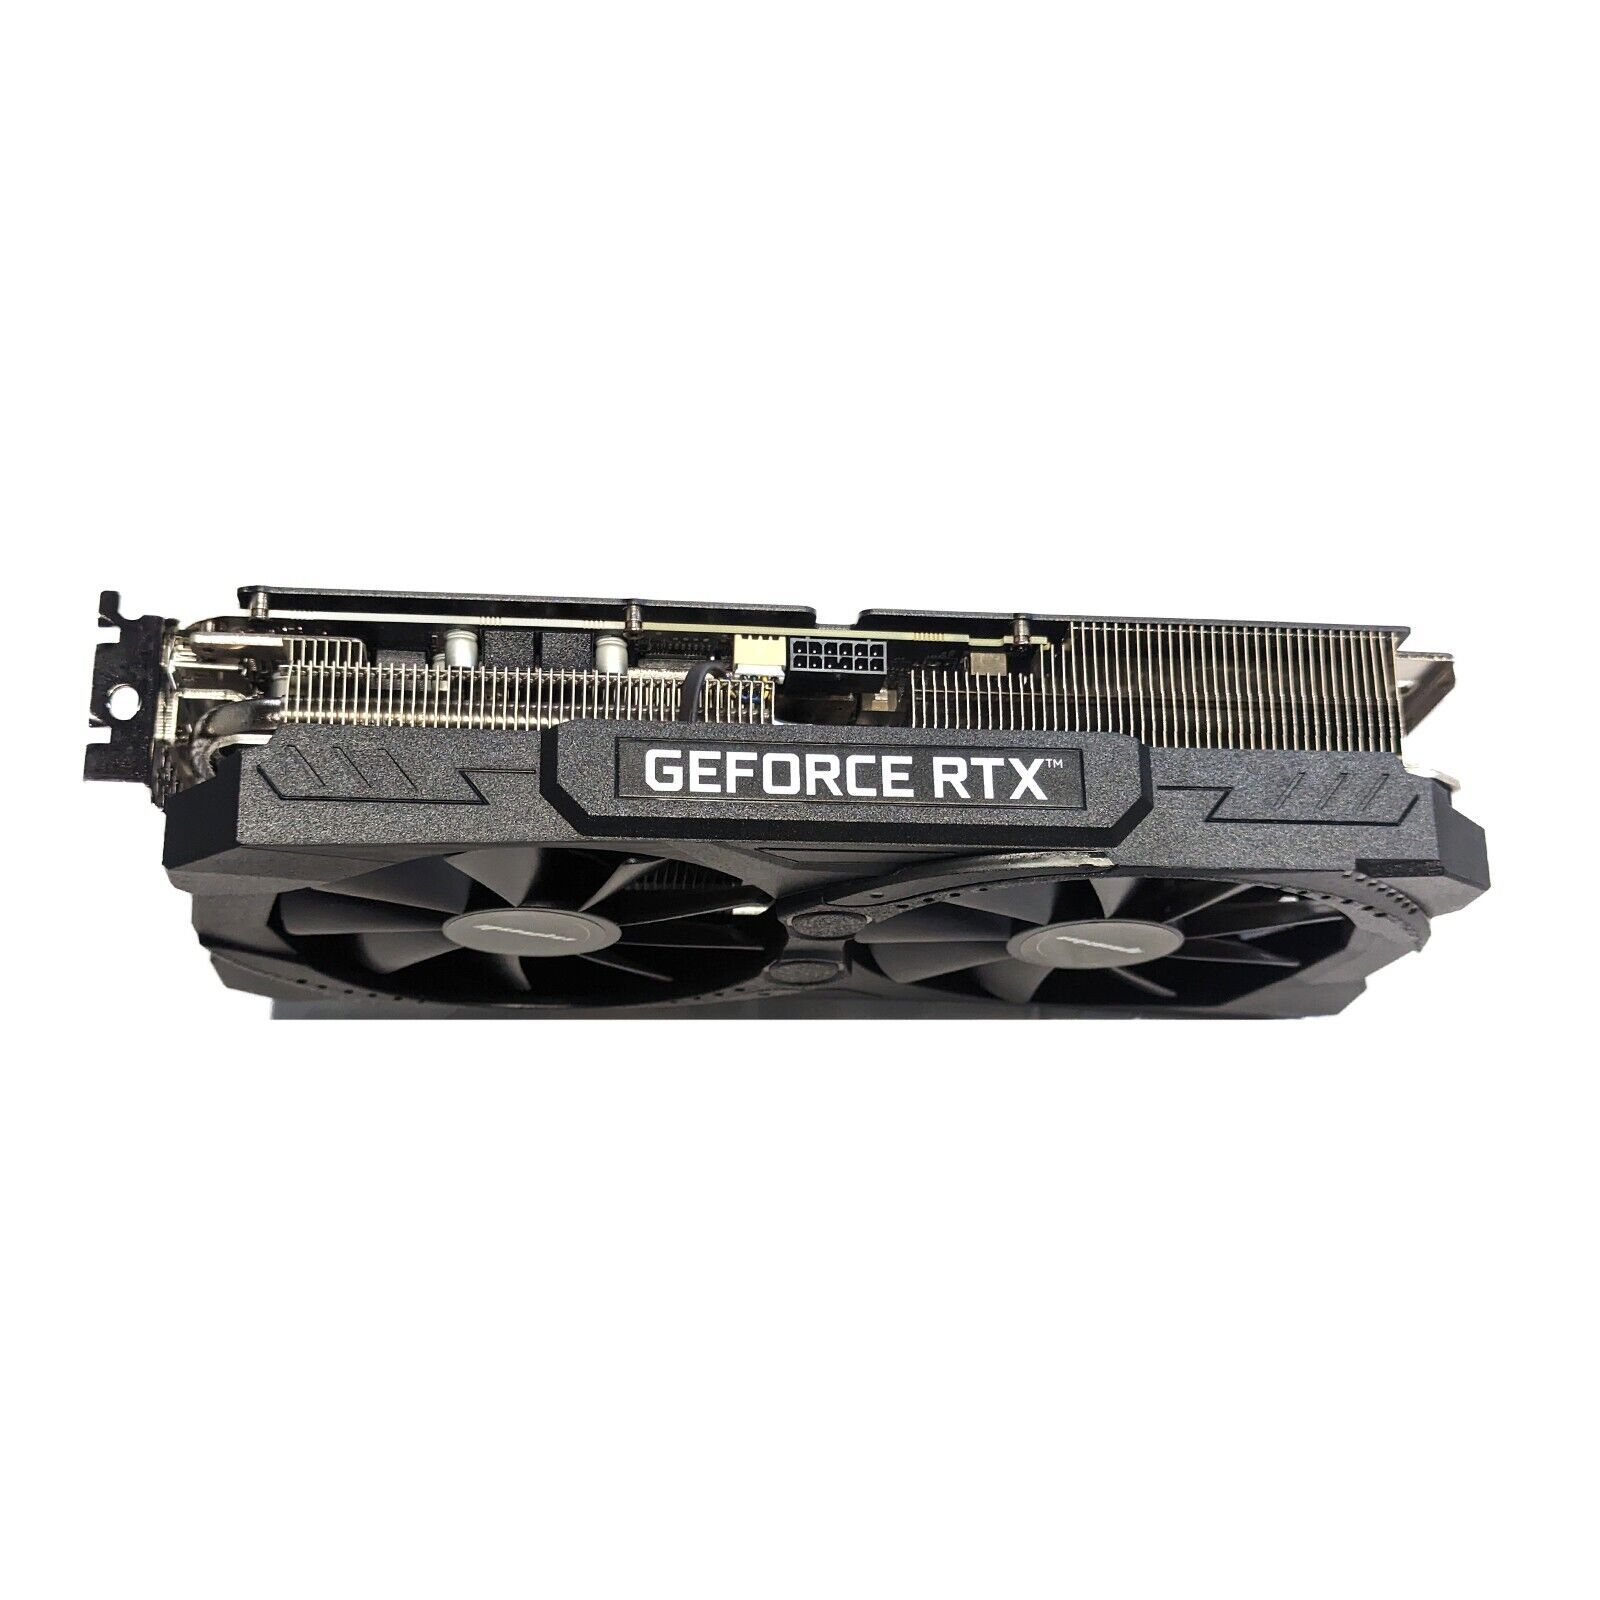 Manli nVIDIA GeForce RTX 3070 8GB GDDR6 M-NRTX3070/6RGHPPP-M2479 | FOR PARTS